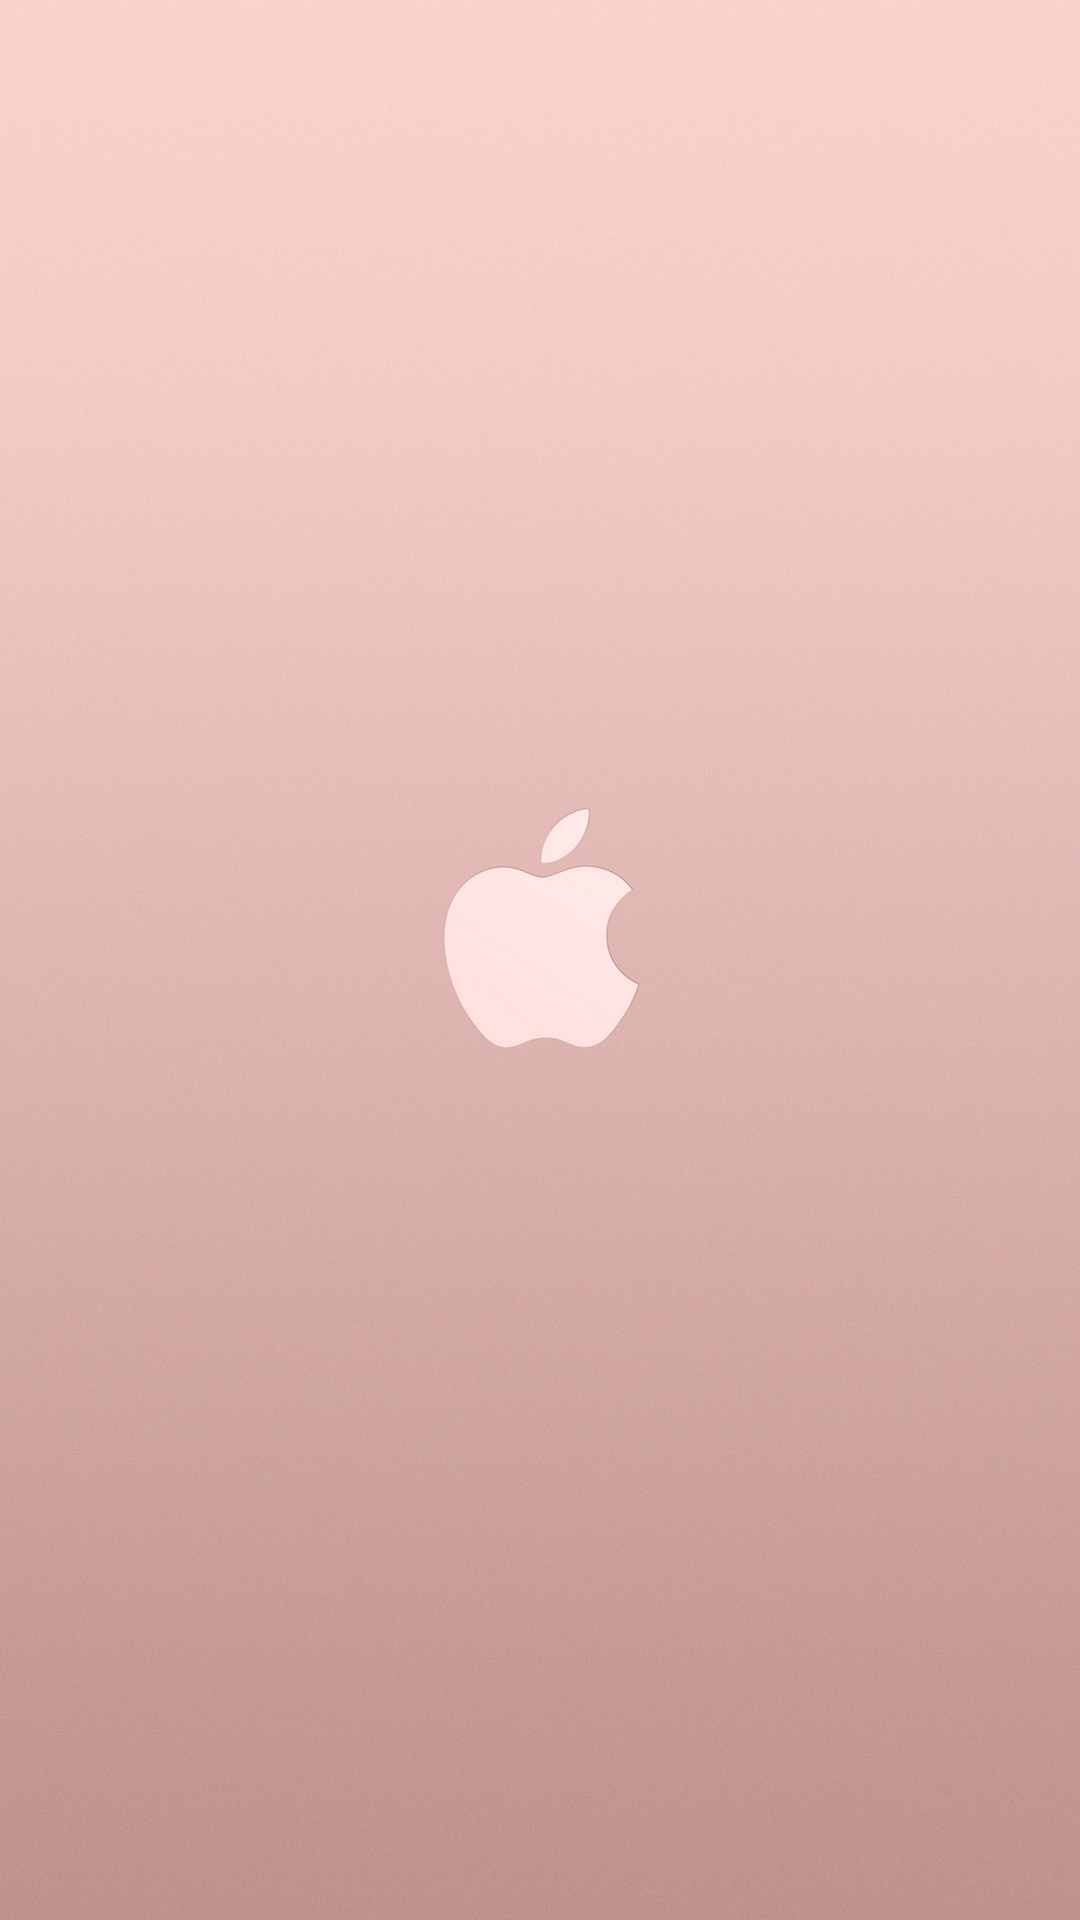 Gold Rose Wallpaper For iPhone resolution 1080x1920